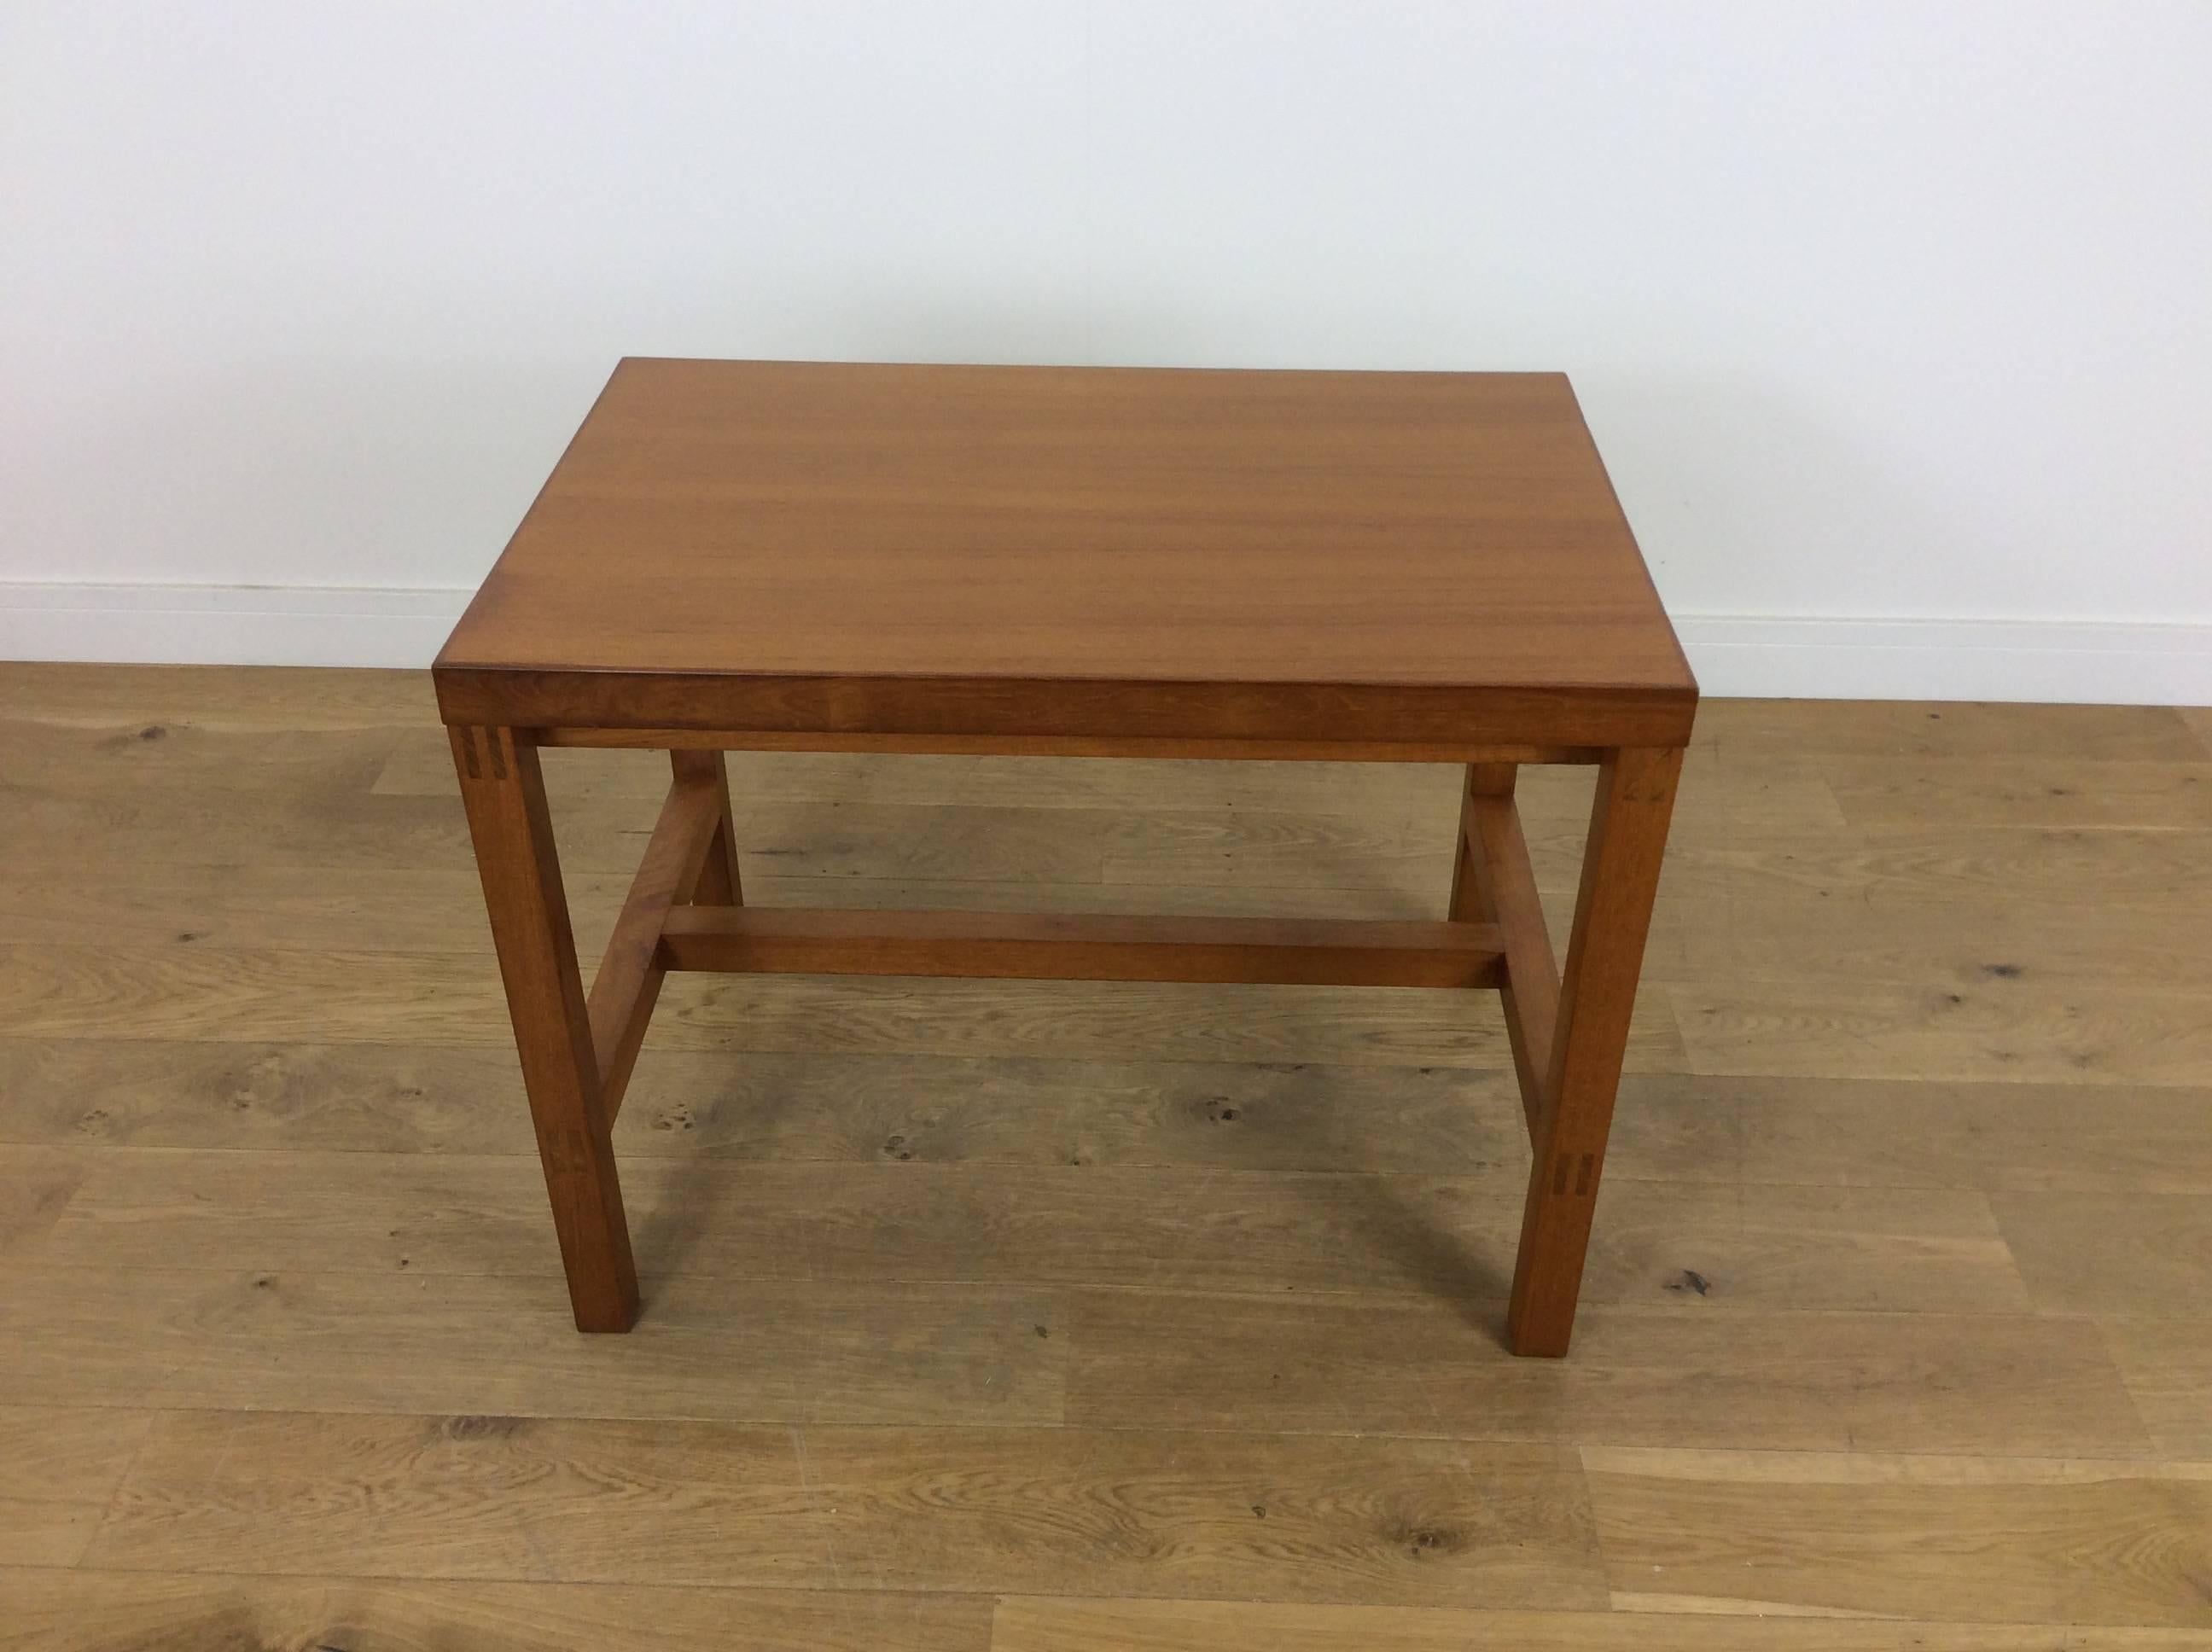 Midcentury serving or side table.
Fine quality to this very smart table.
Designed by Alfred Cox
Measures: 71 cm H, 91.5 cm W, 61 cm D
British, circa 1970.